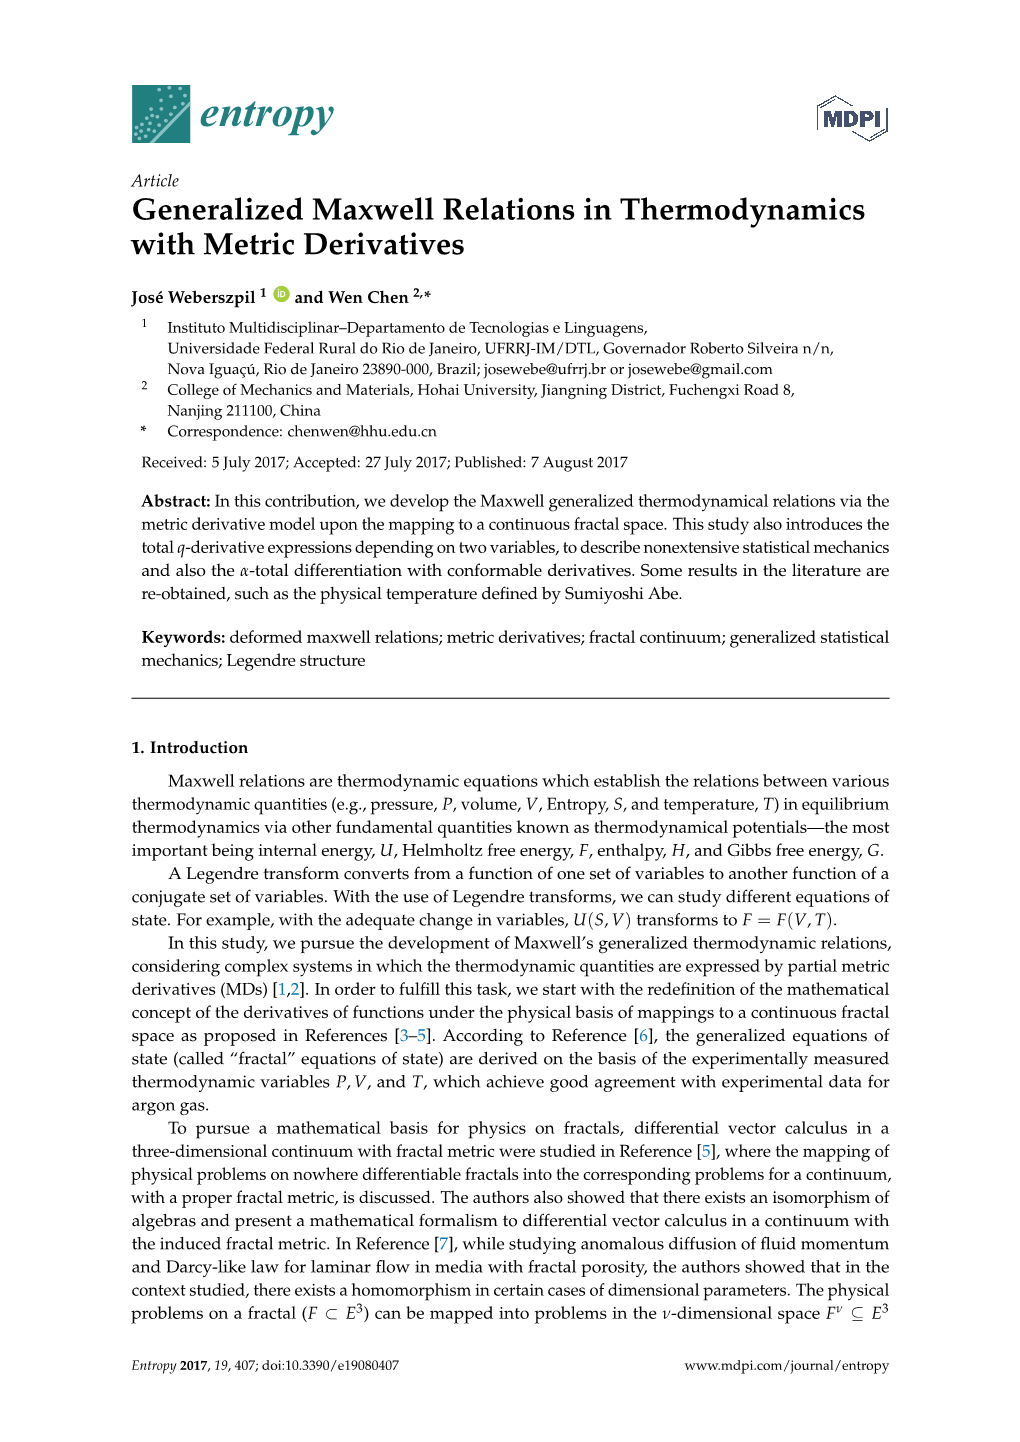 Generalized Maxwell Relations in Thermodynamics with Metric Derivatives